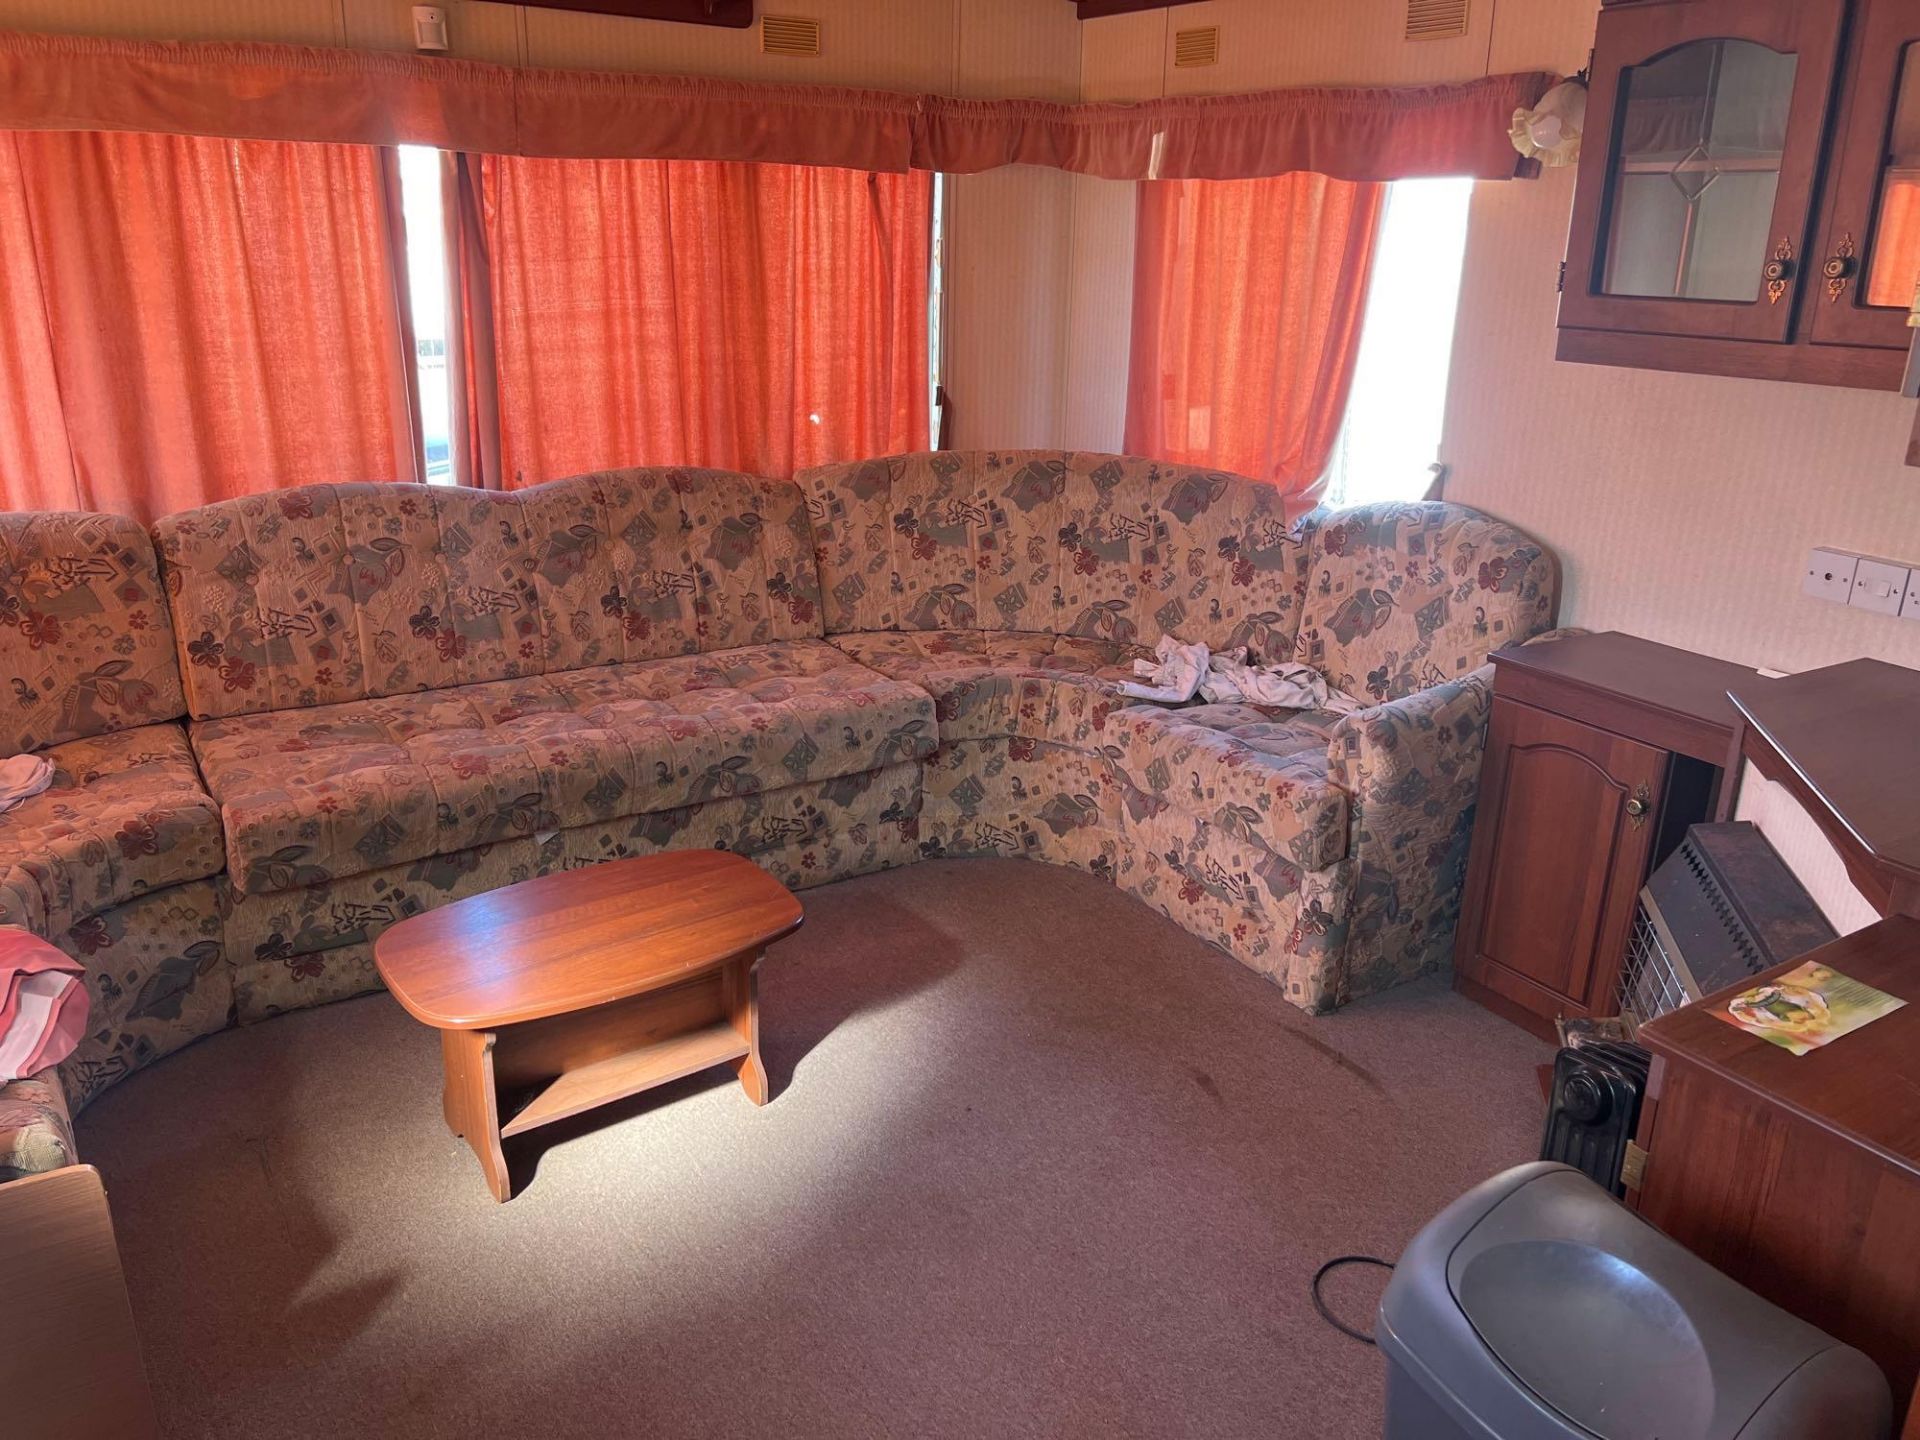 36ft mobile home - Image 6 of 10